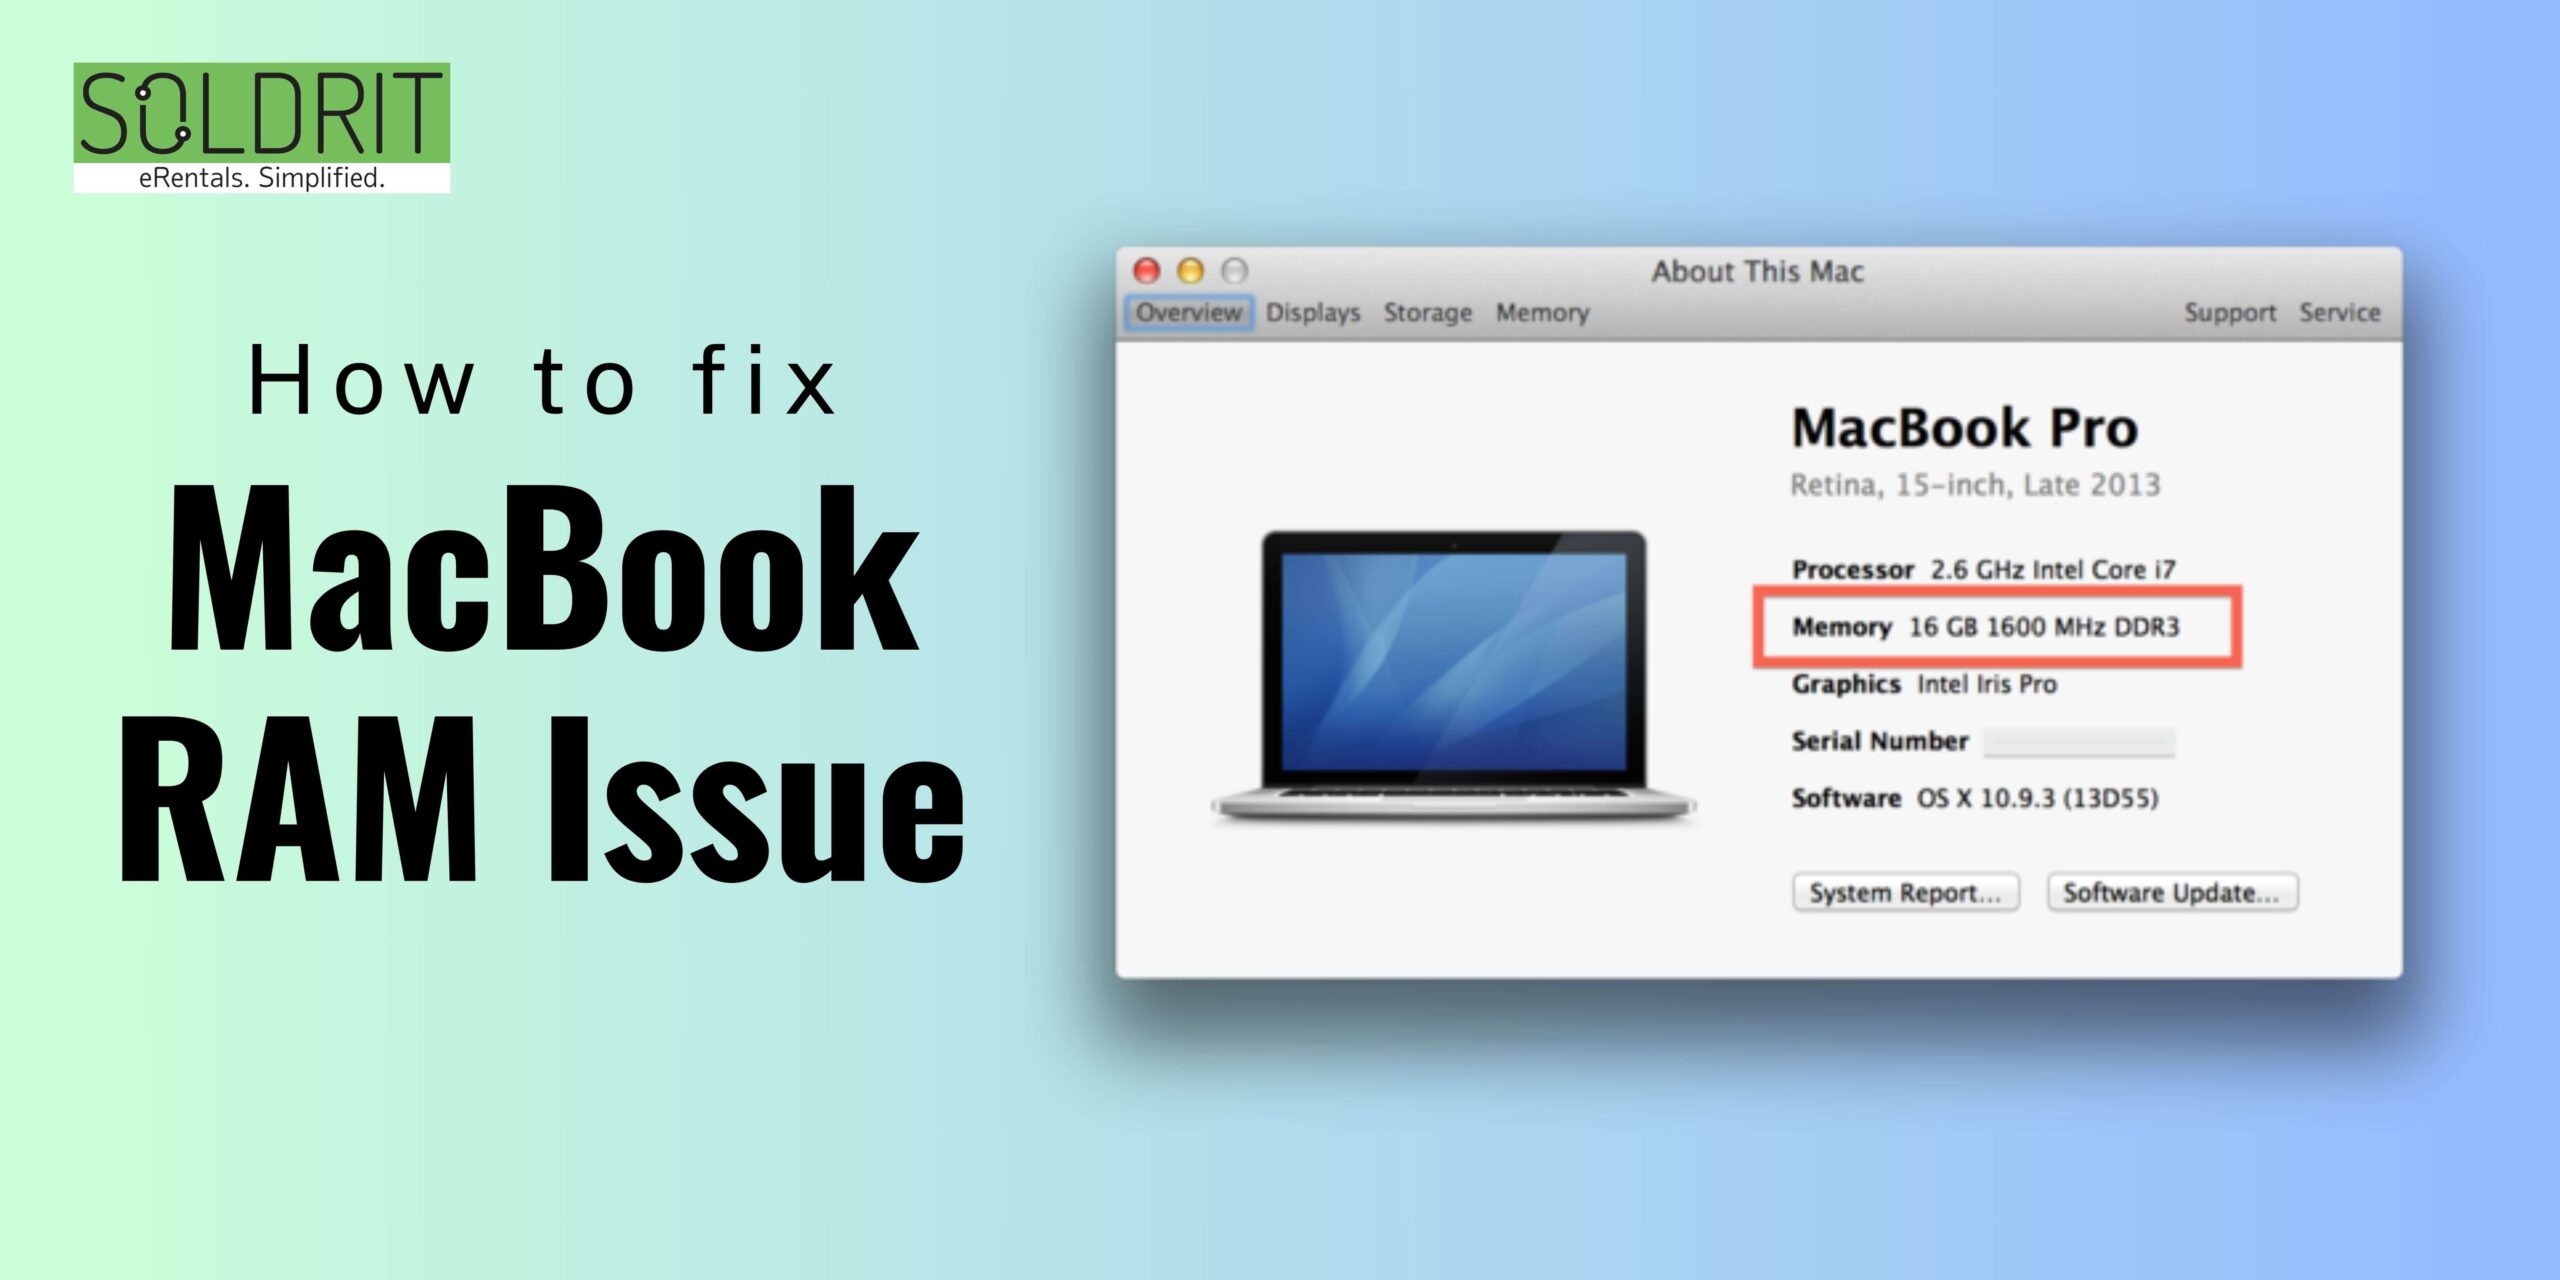 MacBook RAM Issue and How to Fix It